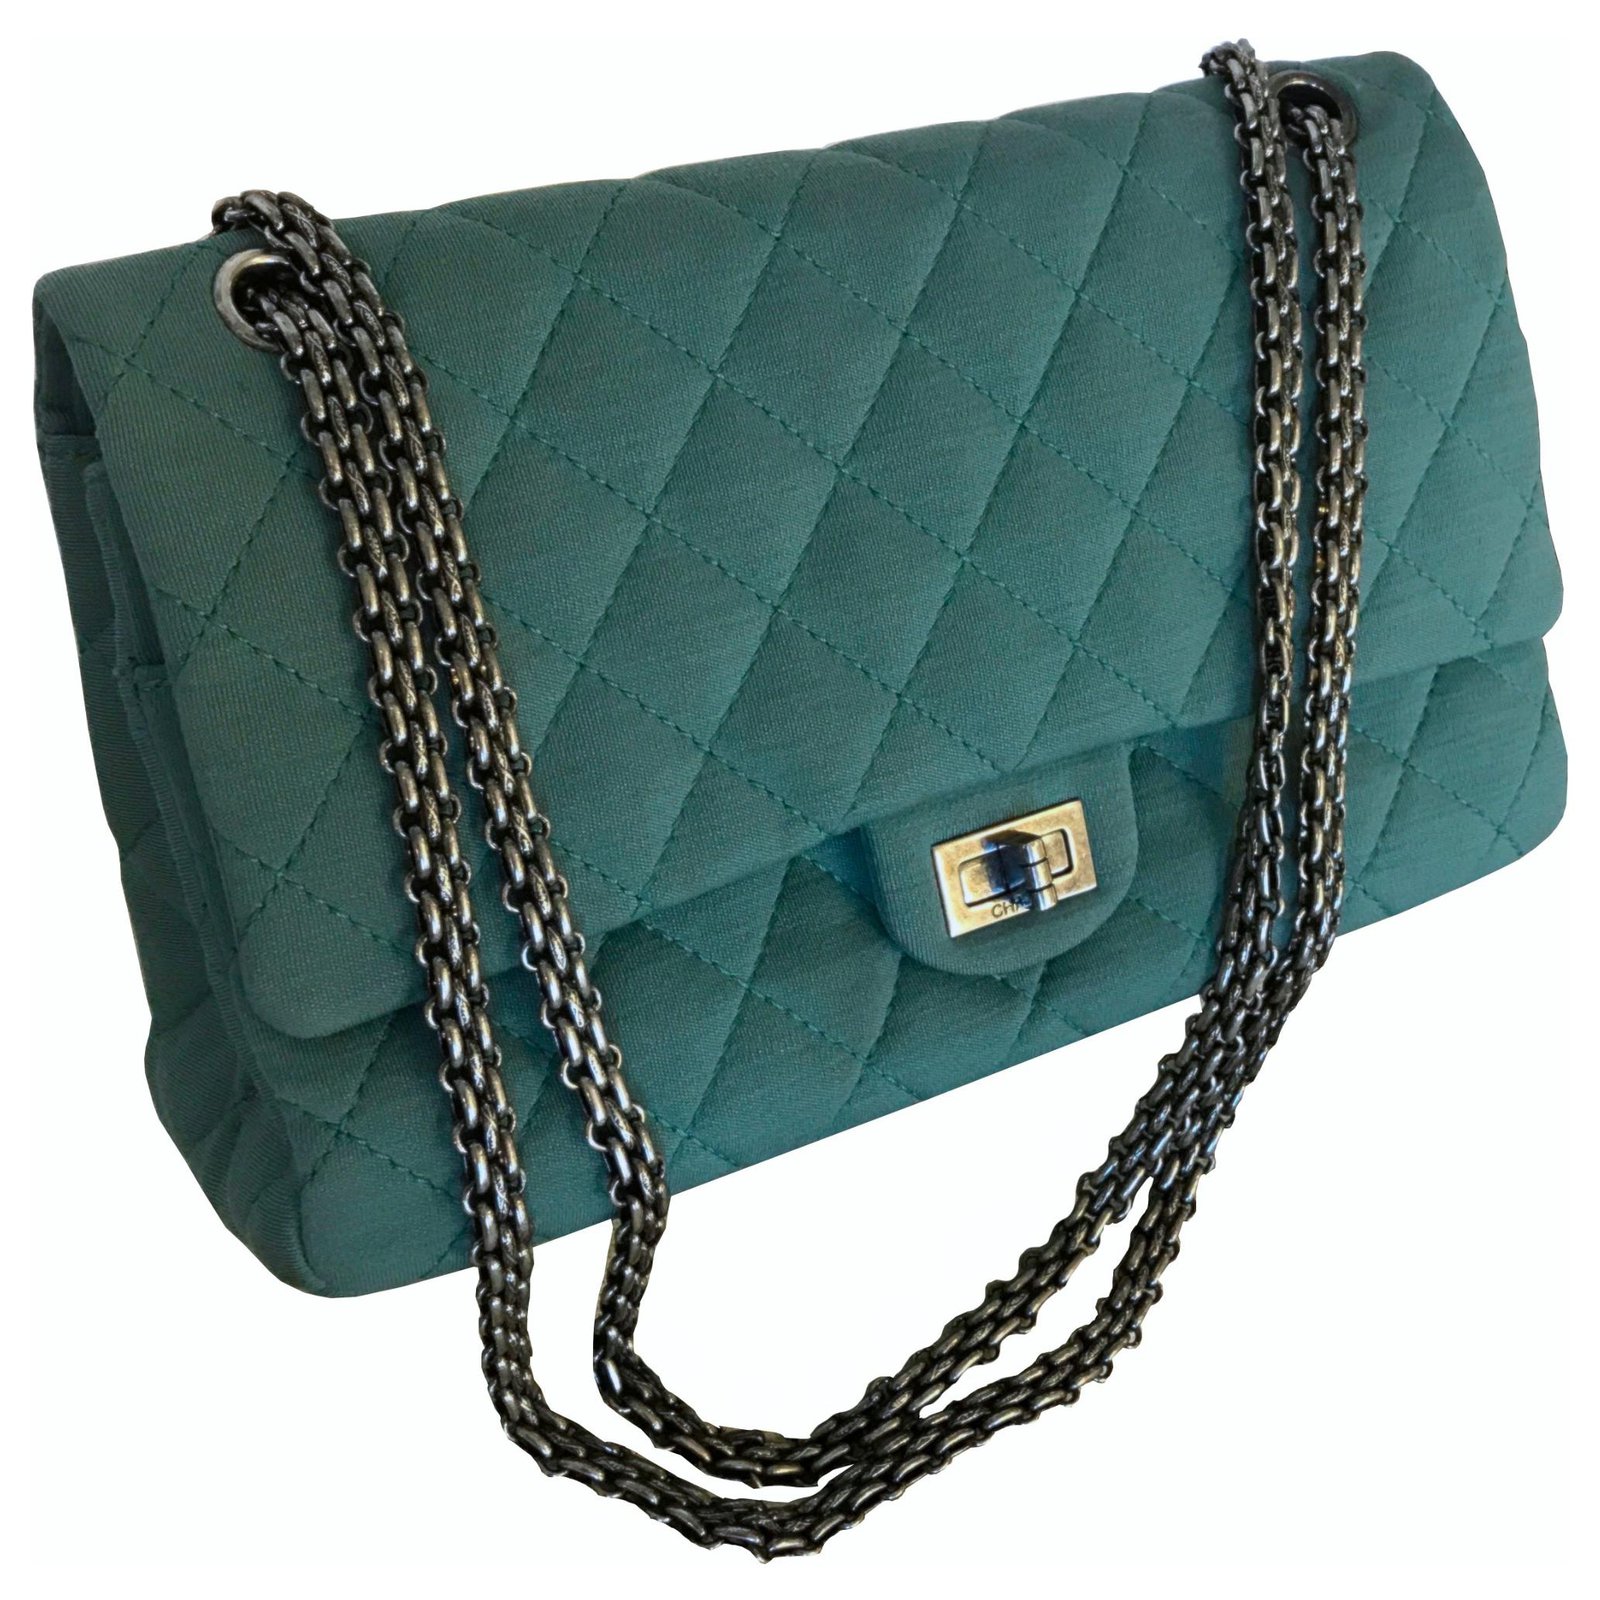 2.55 leather crossbody bag Chanel Green in Leather - 19123733